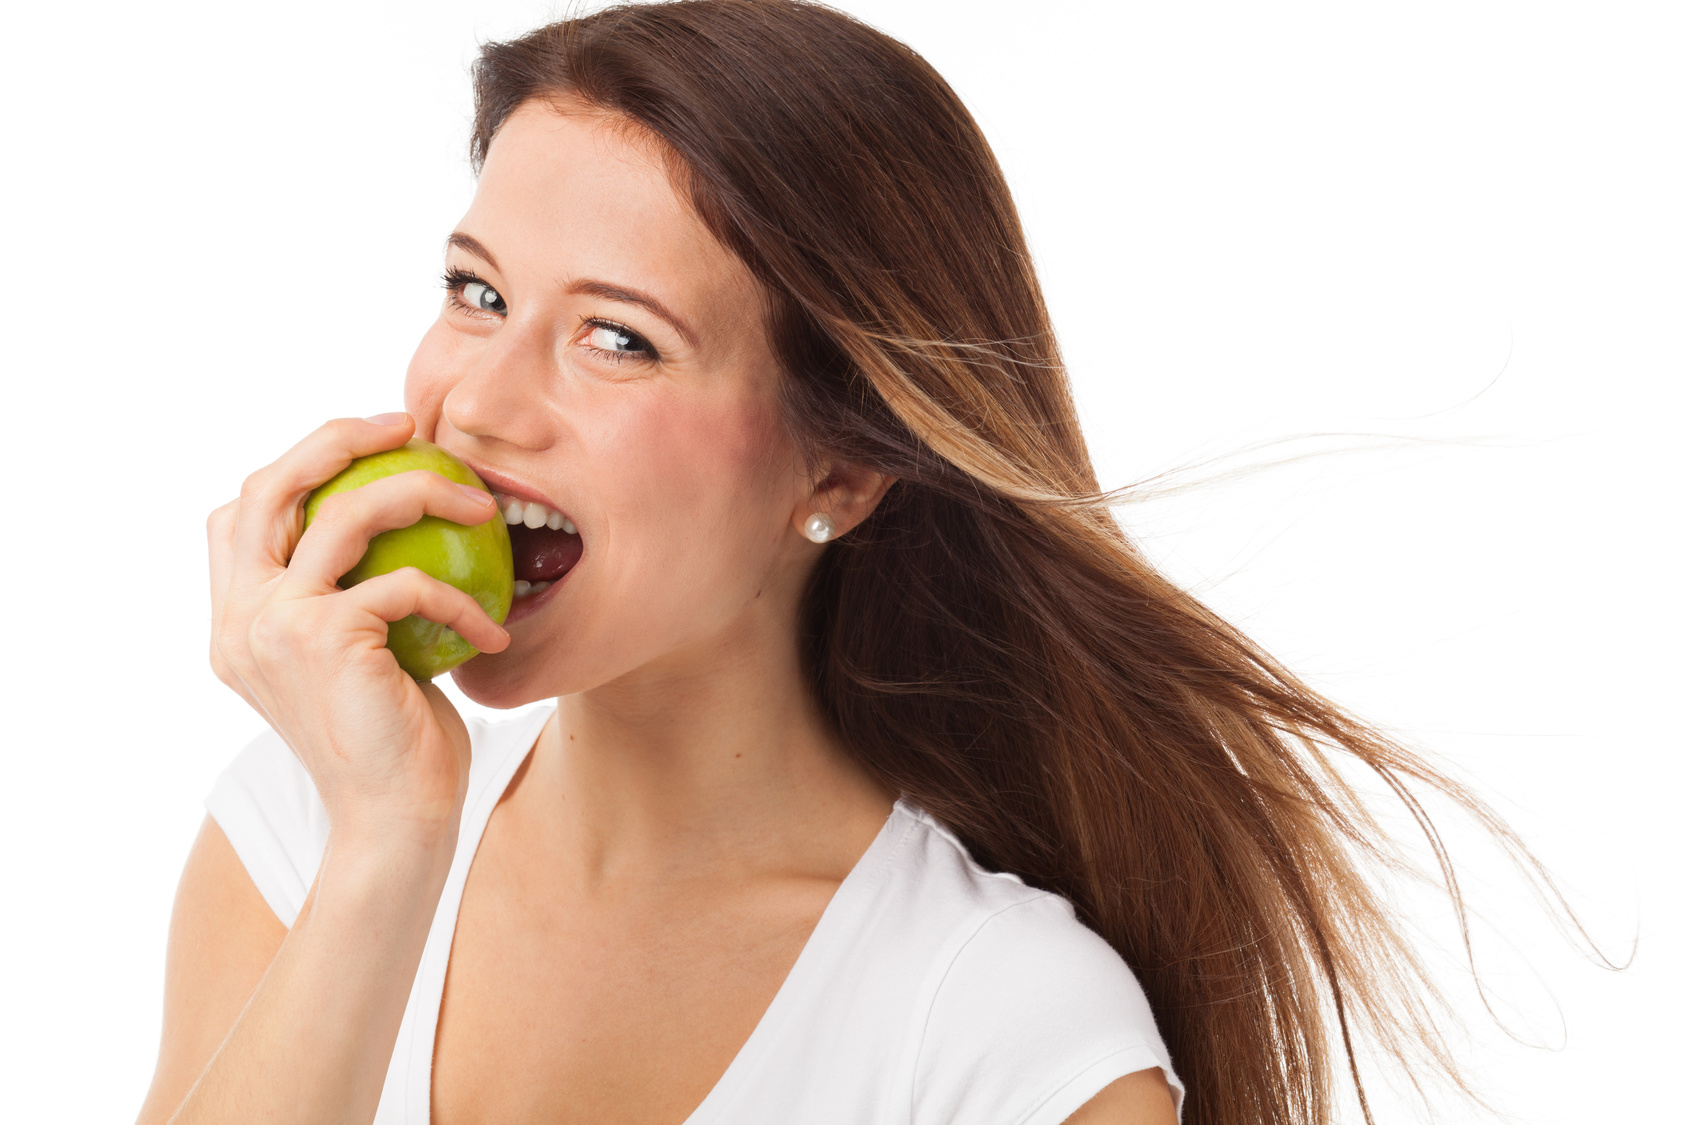 Young woman biting a green apple, isolated on white